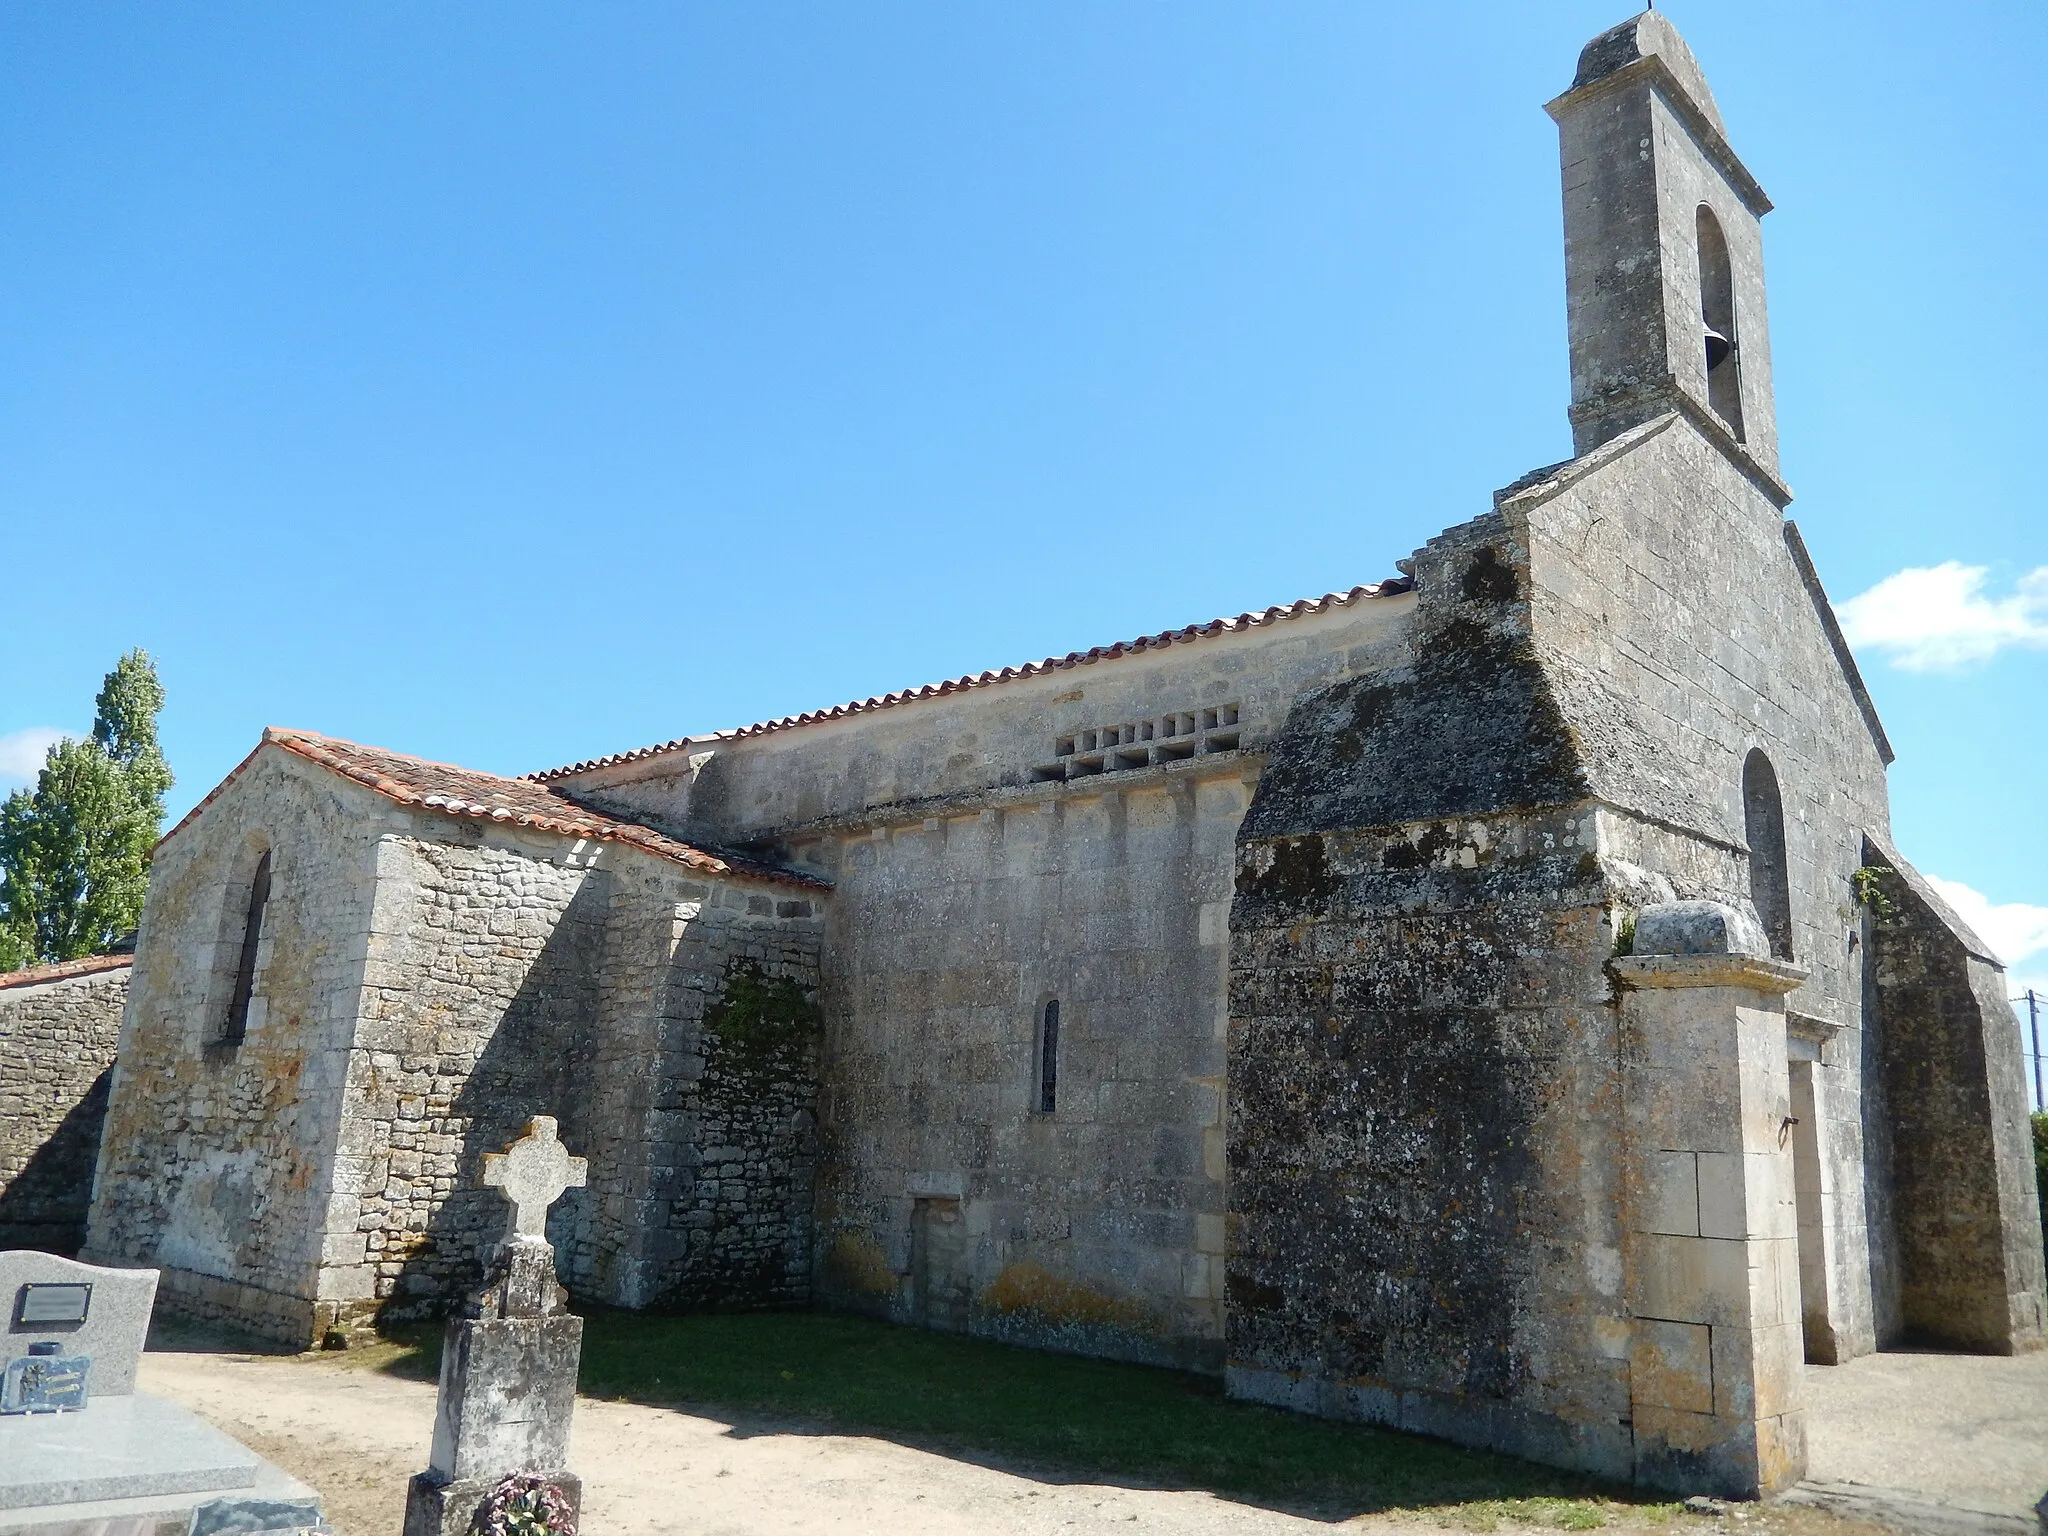 Photo showing: The Saint Germain church in Beaugeay, Charente-Maritime, France. Built in the eleventh century.